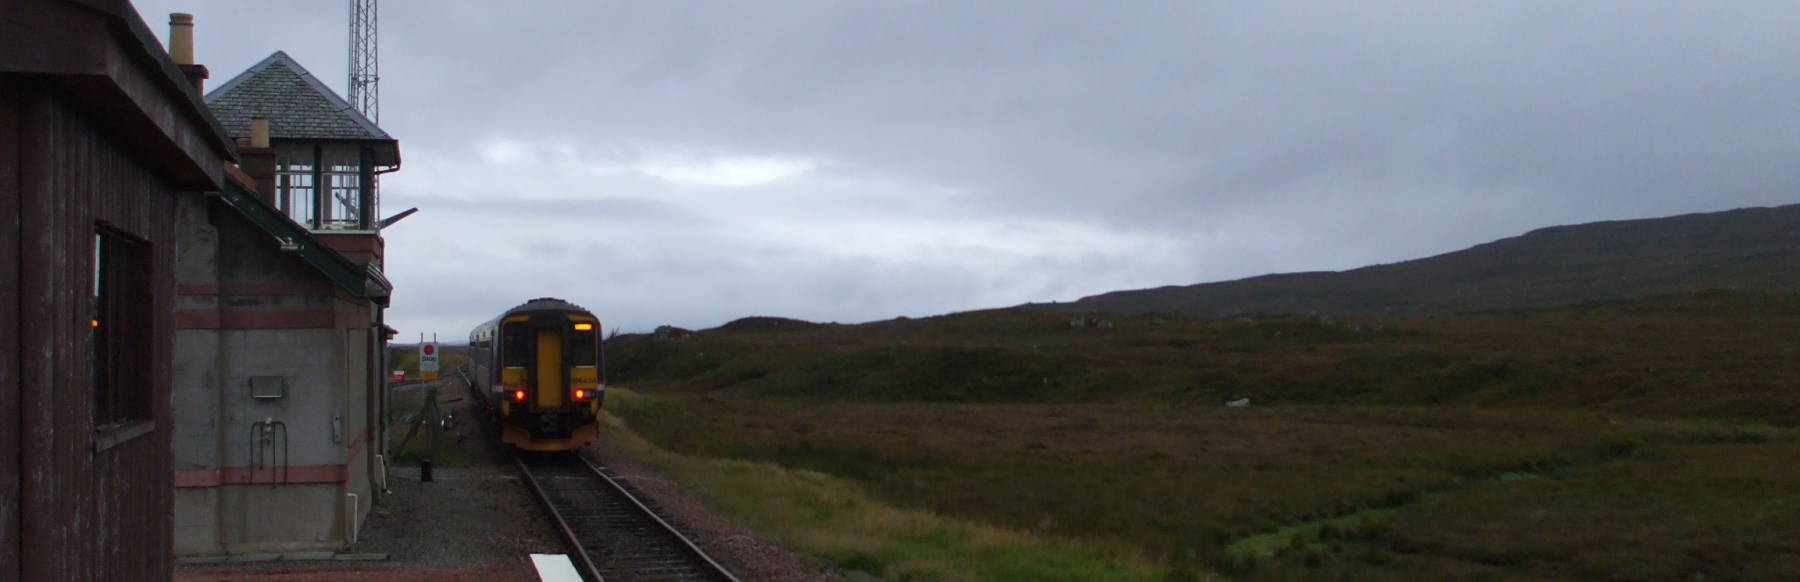 The First ScotRail train leaves Corrour Station for Glasgow, crossing Rannoch Moor in Lochaber, in the Scottish Highlands.